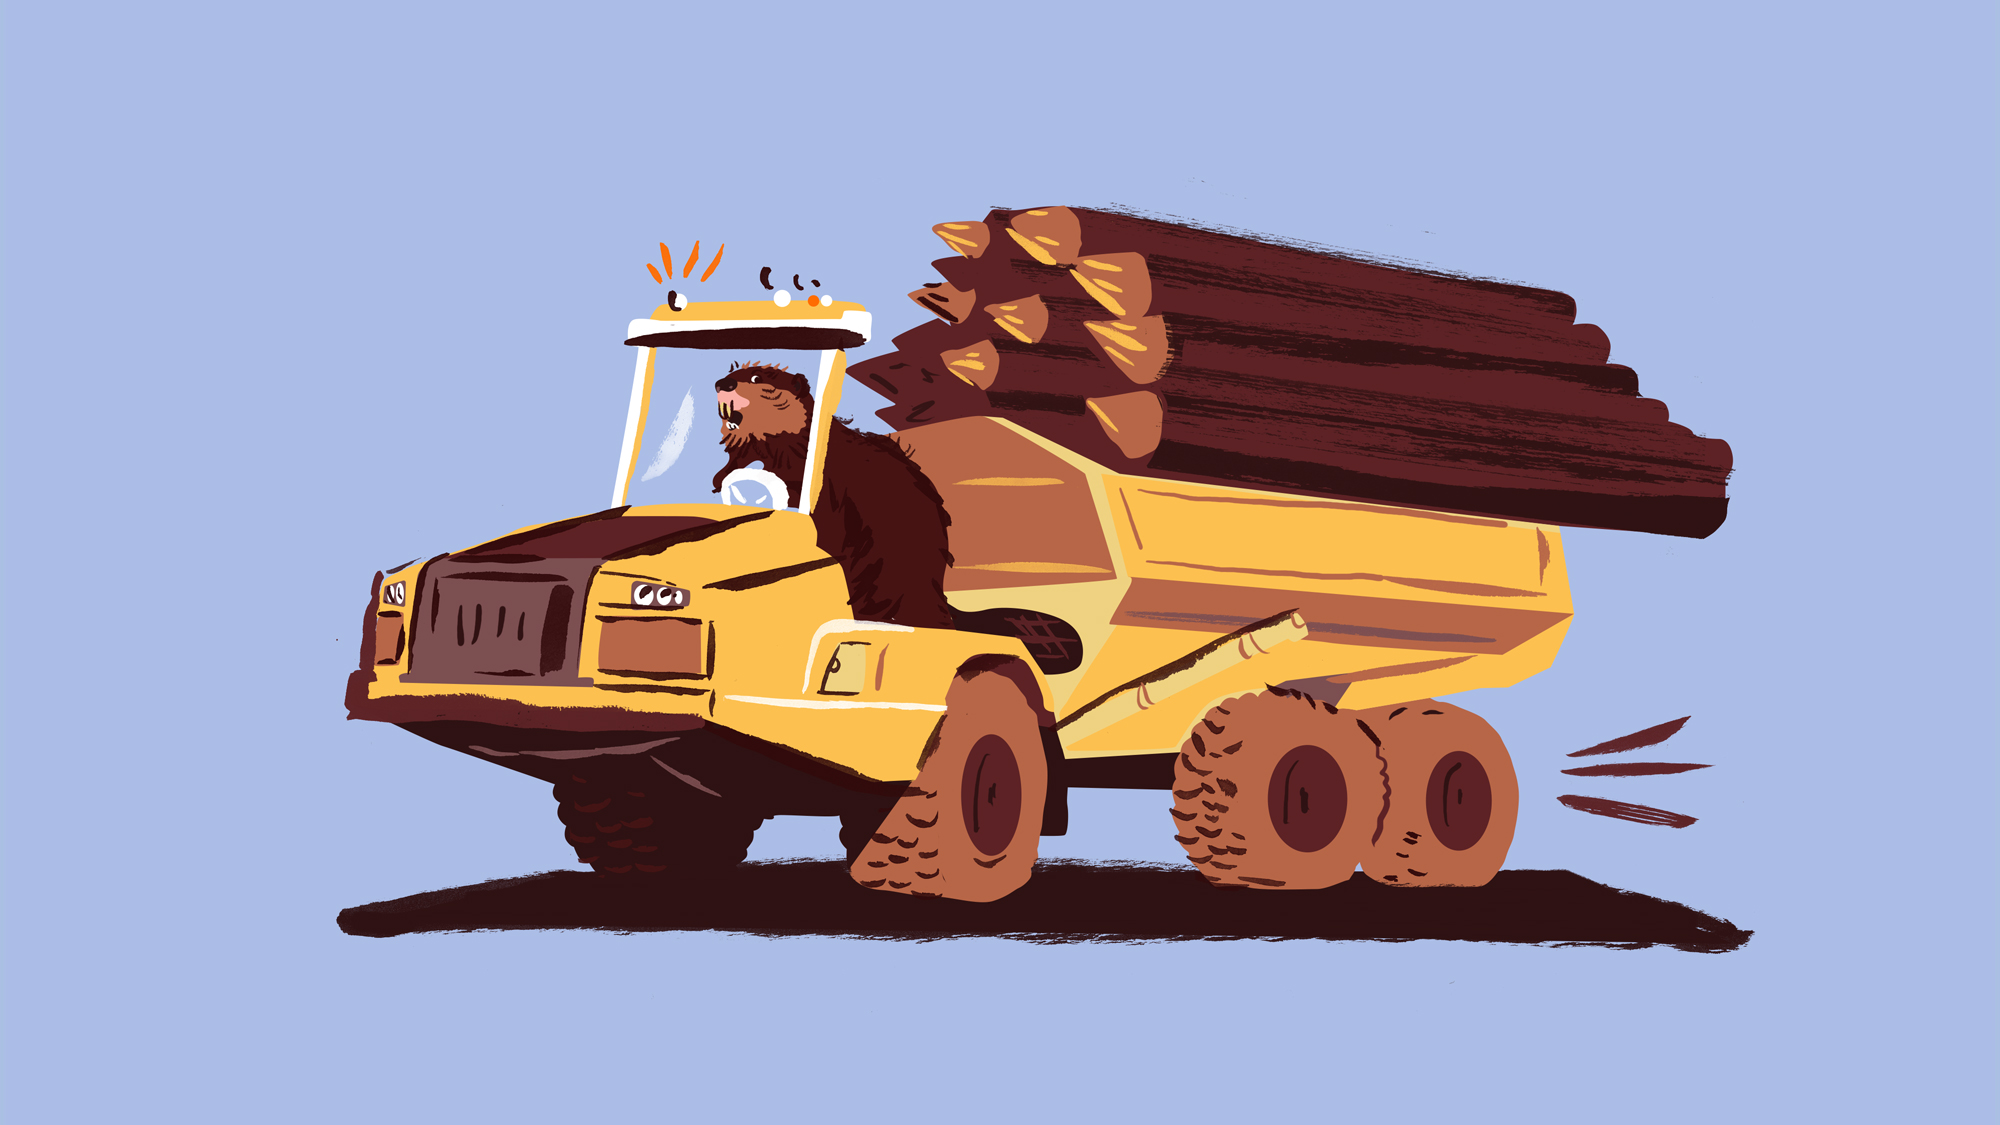 Beaver driving construction truck with logs on back to symbolize ecosystem engineer. Illustrated in purple, yellow, and brown.